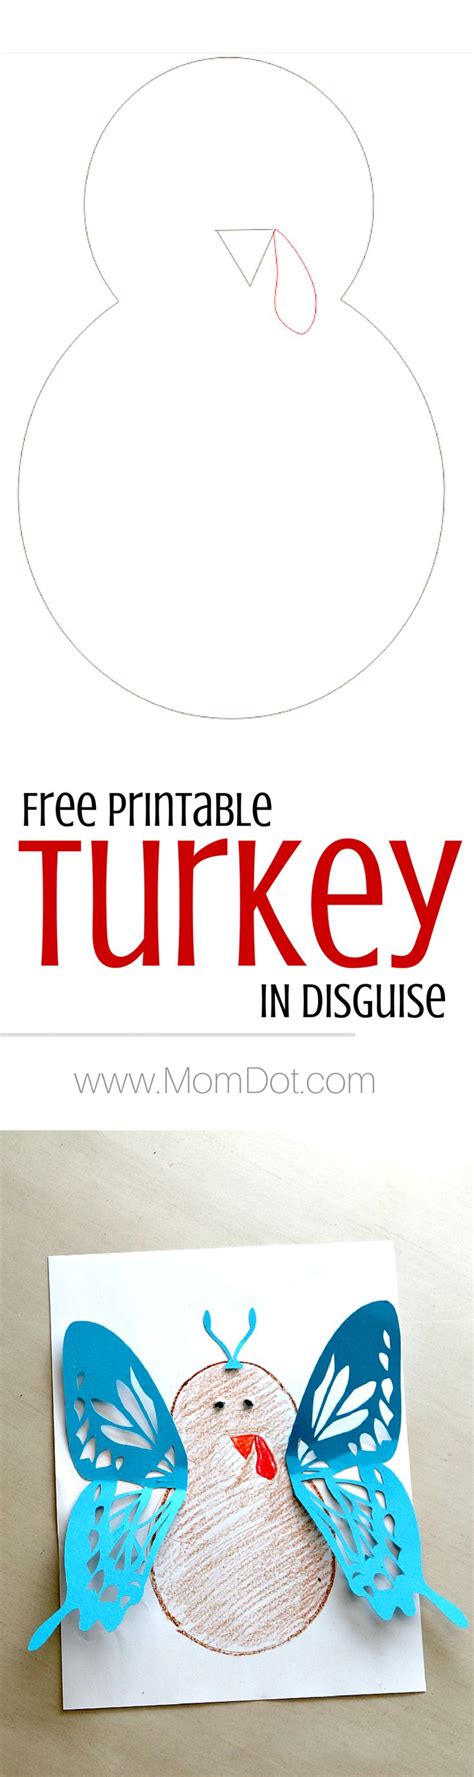 Turkey In Disguise Printable - Printable World Holiday